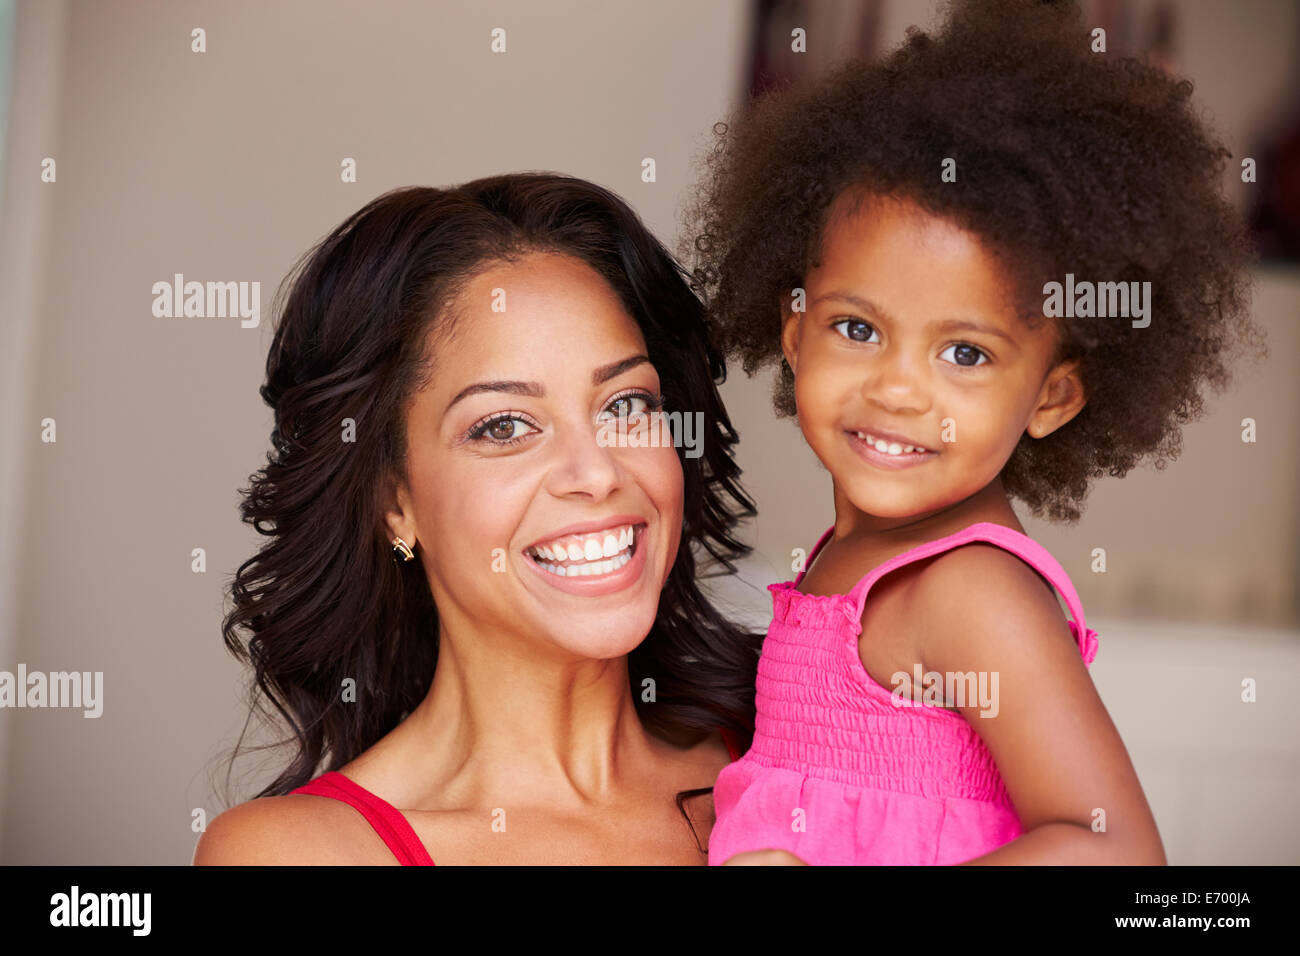 Mother Cuddling Daughter At Home Stock Photo